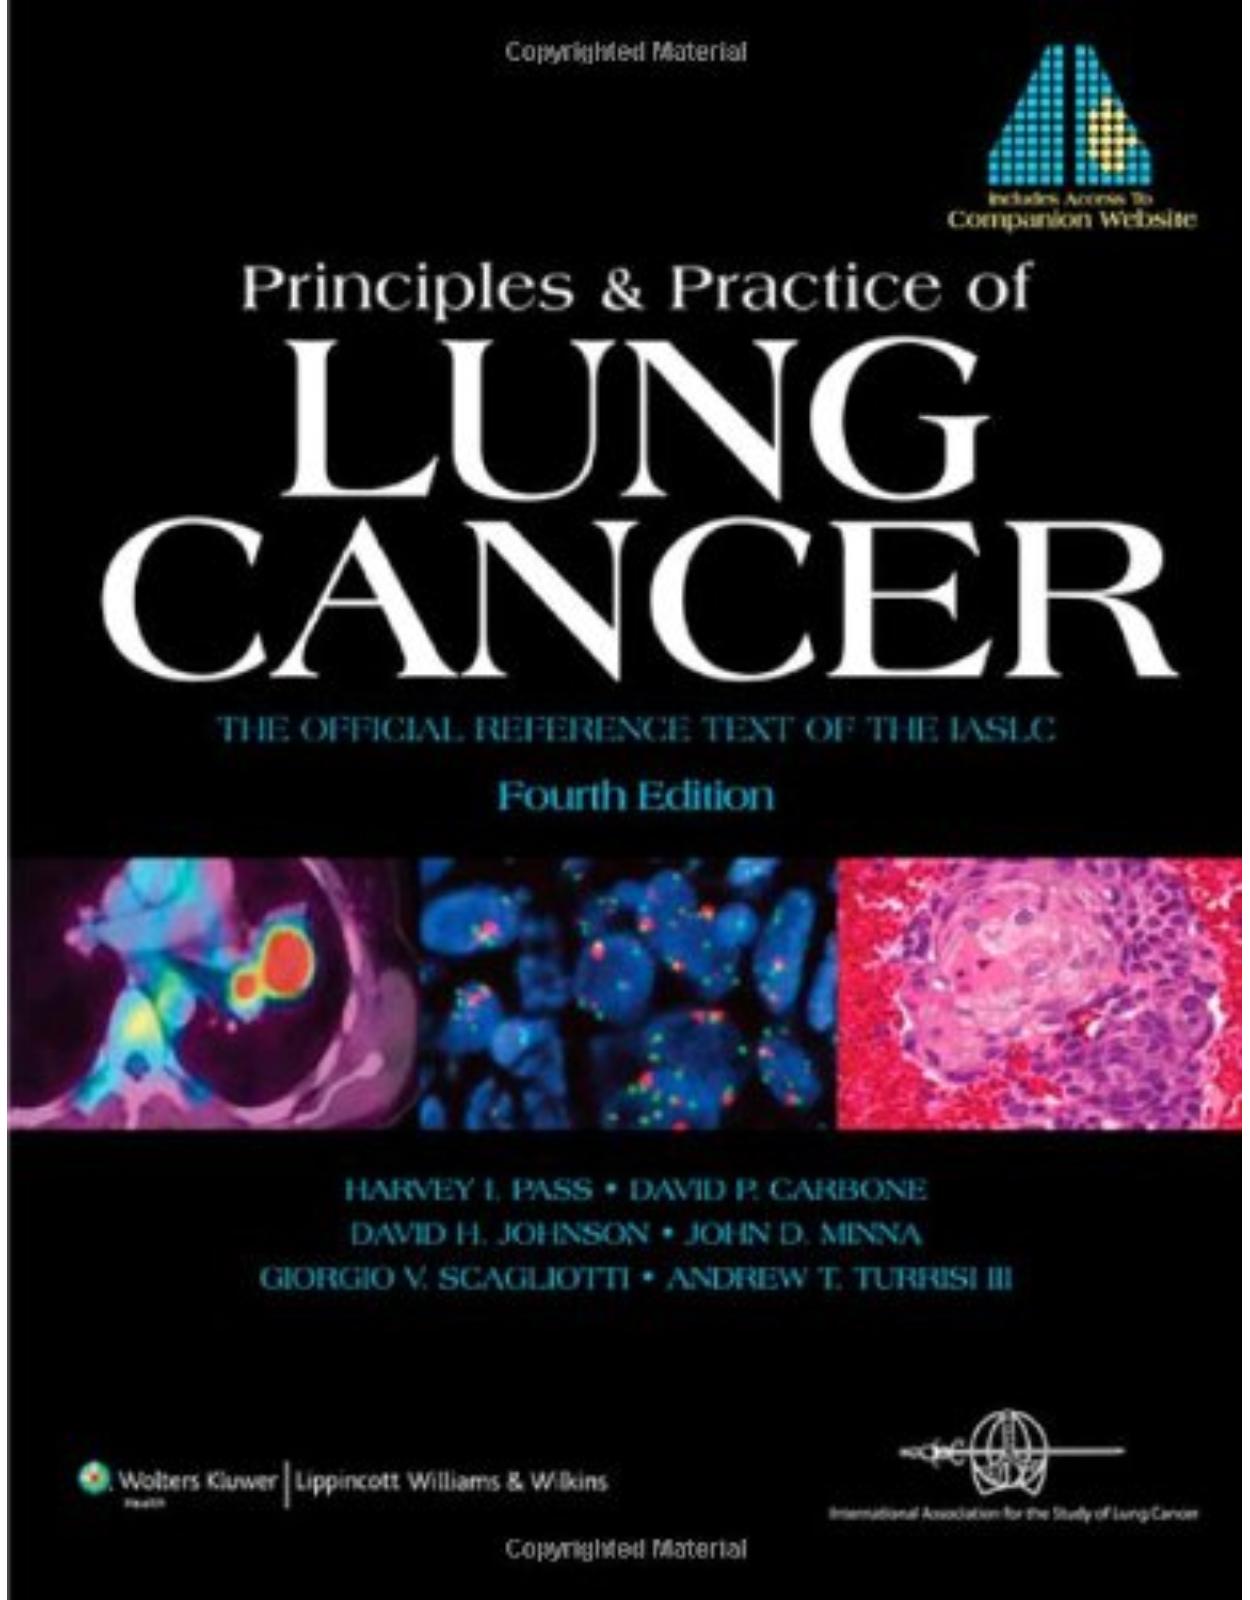 Principles and Practice of Lung Cancer: The Official Reference Text of the International Association for the Study of Lung Cancer (IASLC)